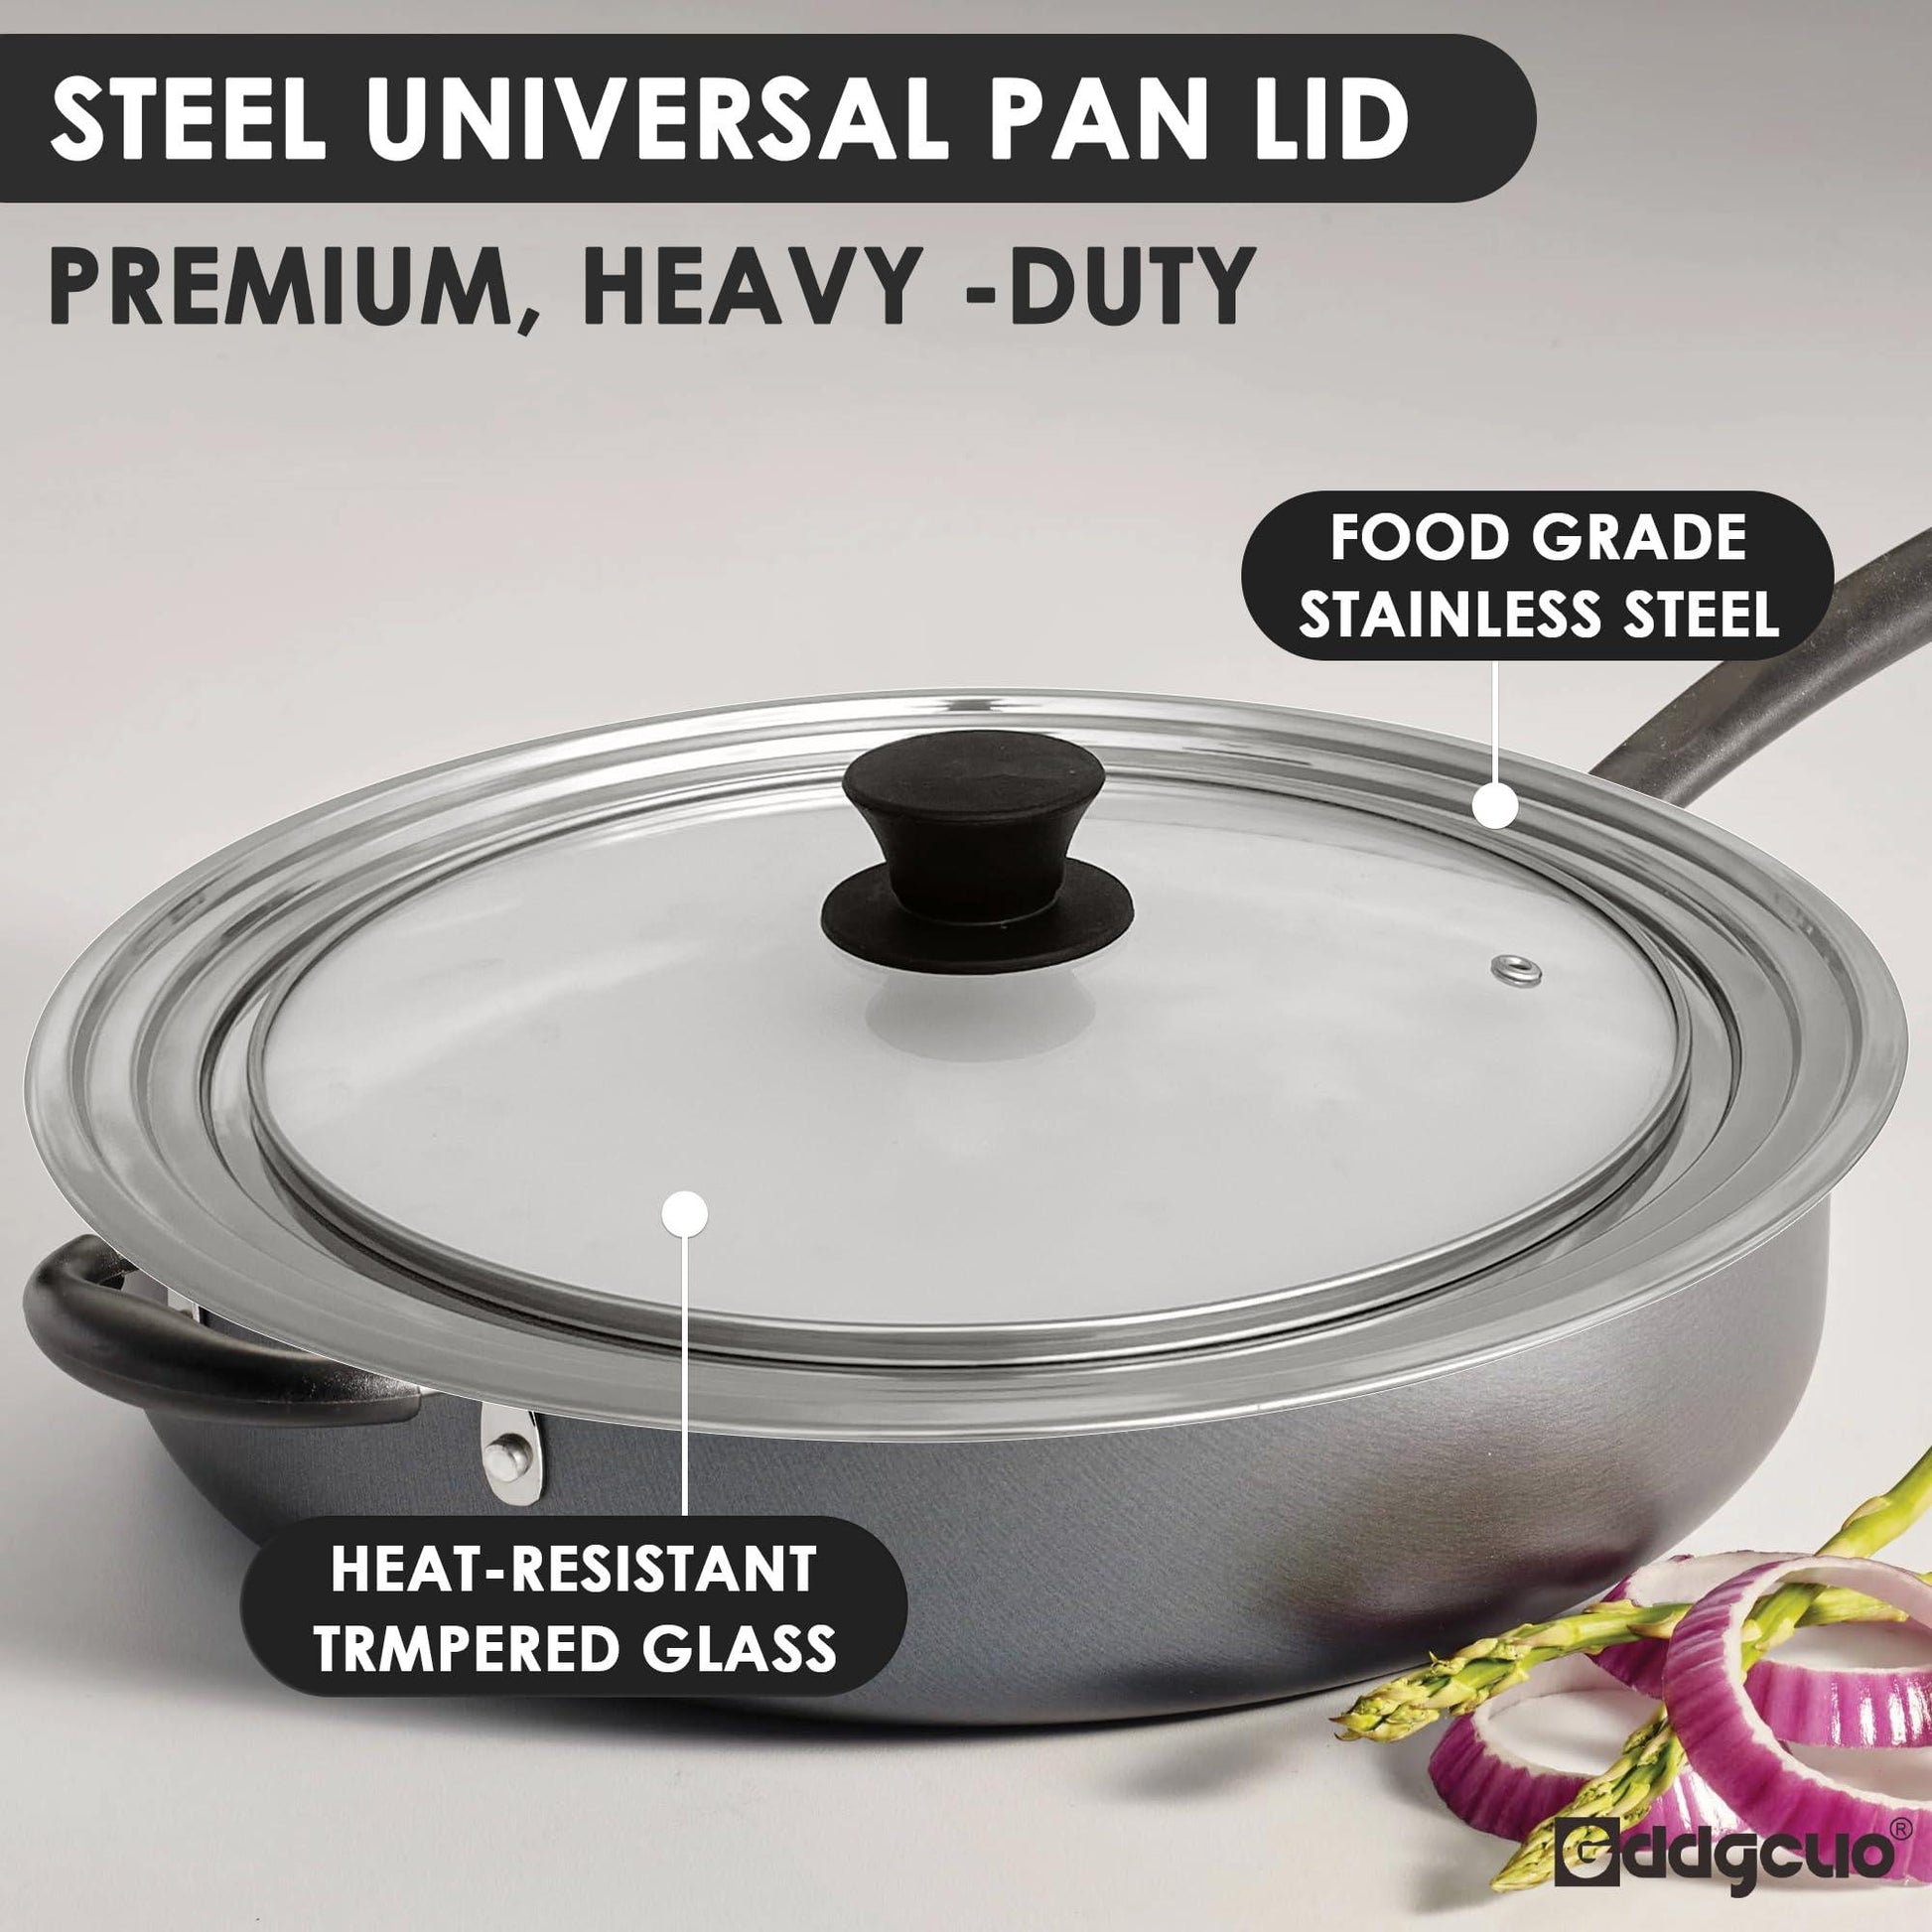 GDDGCUO Universal Lid for Pots and Pans, Fits 9", 10" & 10.5" Diameter Cookware, Replacement Stainless Steel Skillets lids, Heat Resistant Frying Pan lid, Dishwasher Safe and BPA Free - CookCave